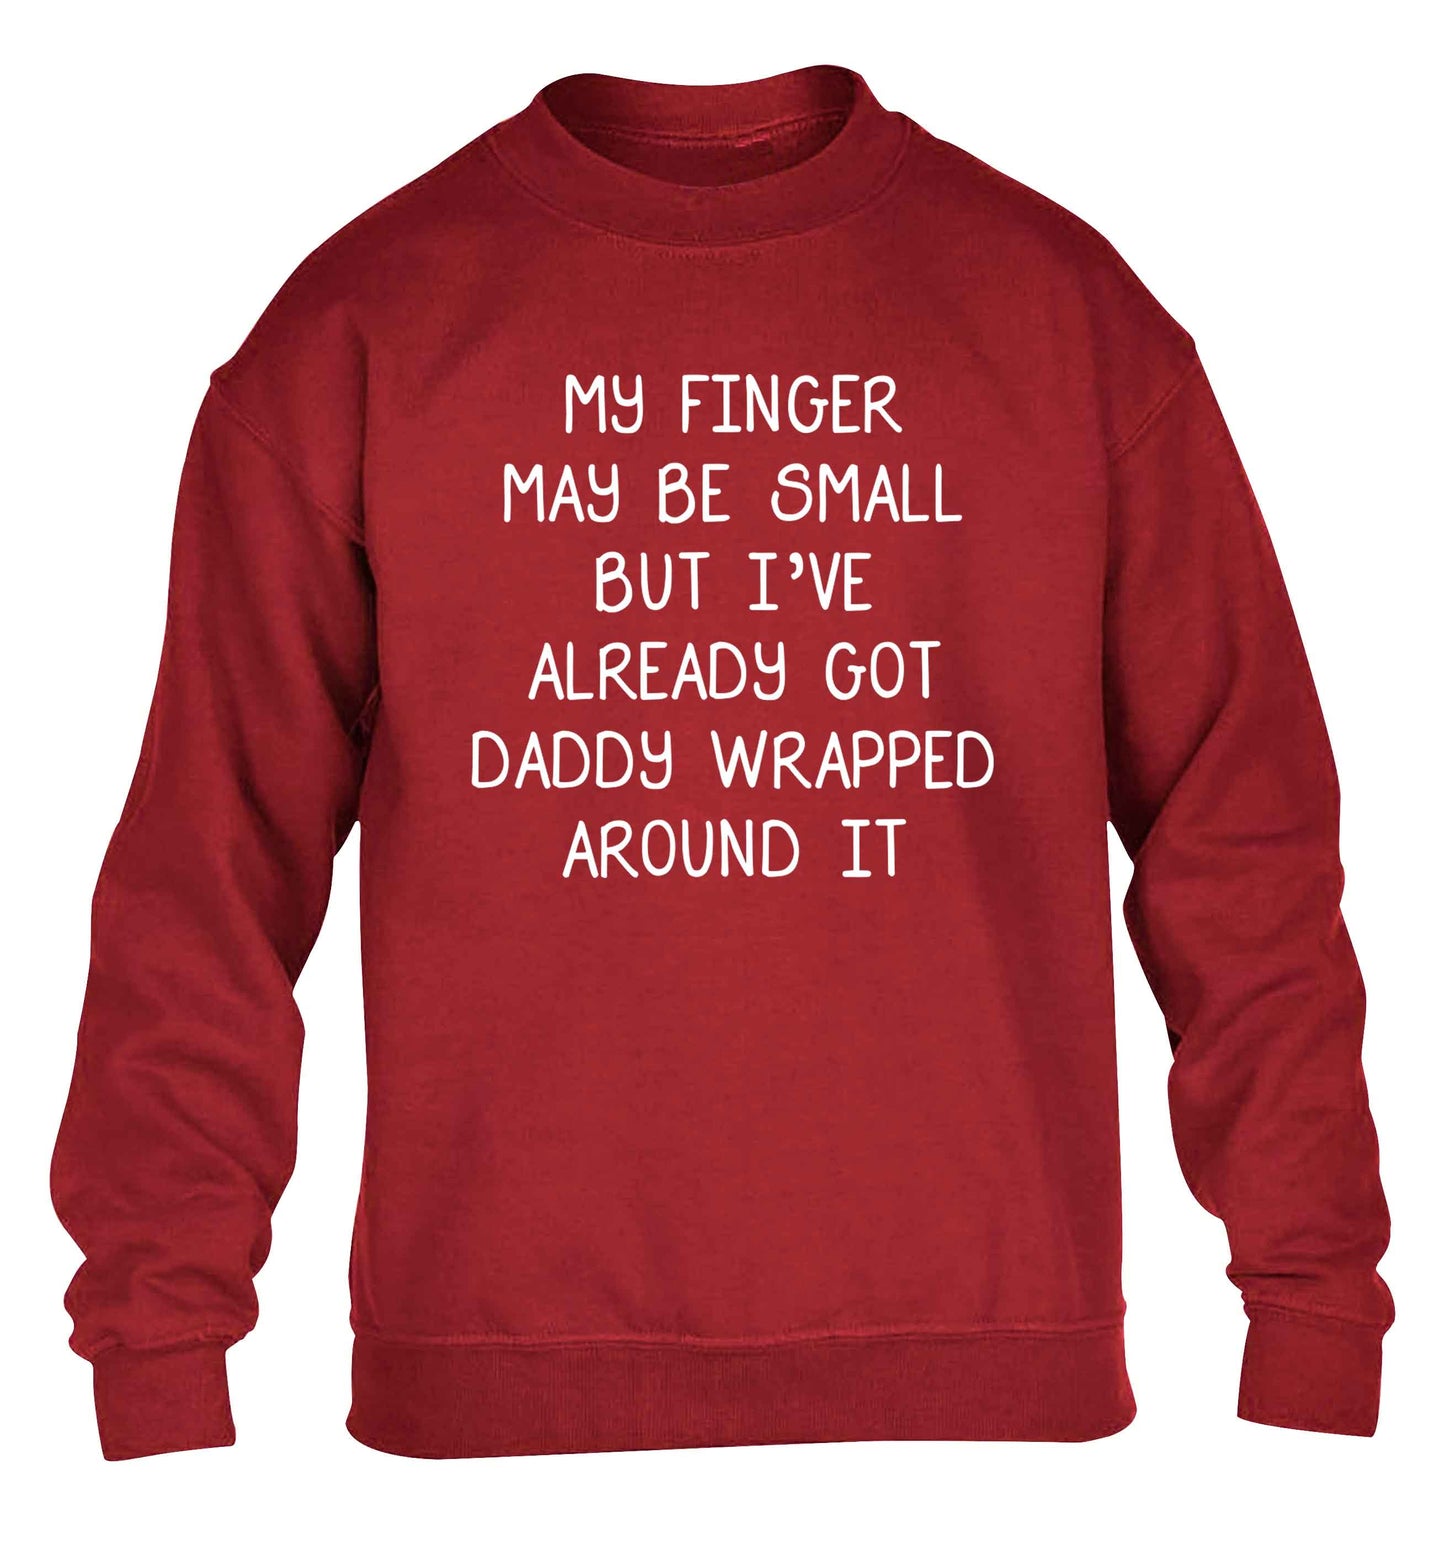 My finger may be small but I've already got daddy wrapped around it children's grey sweater 12-13 Years